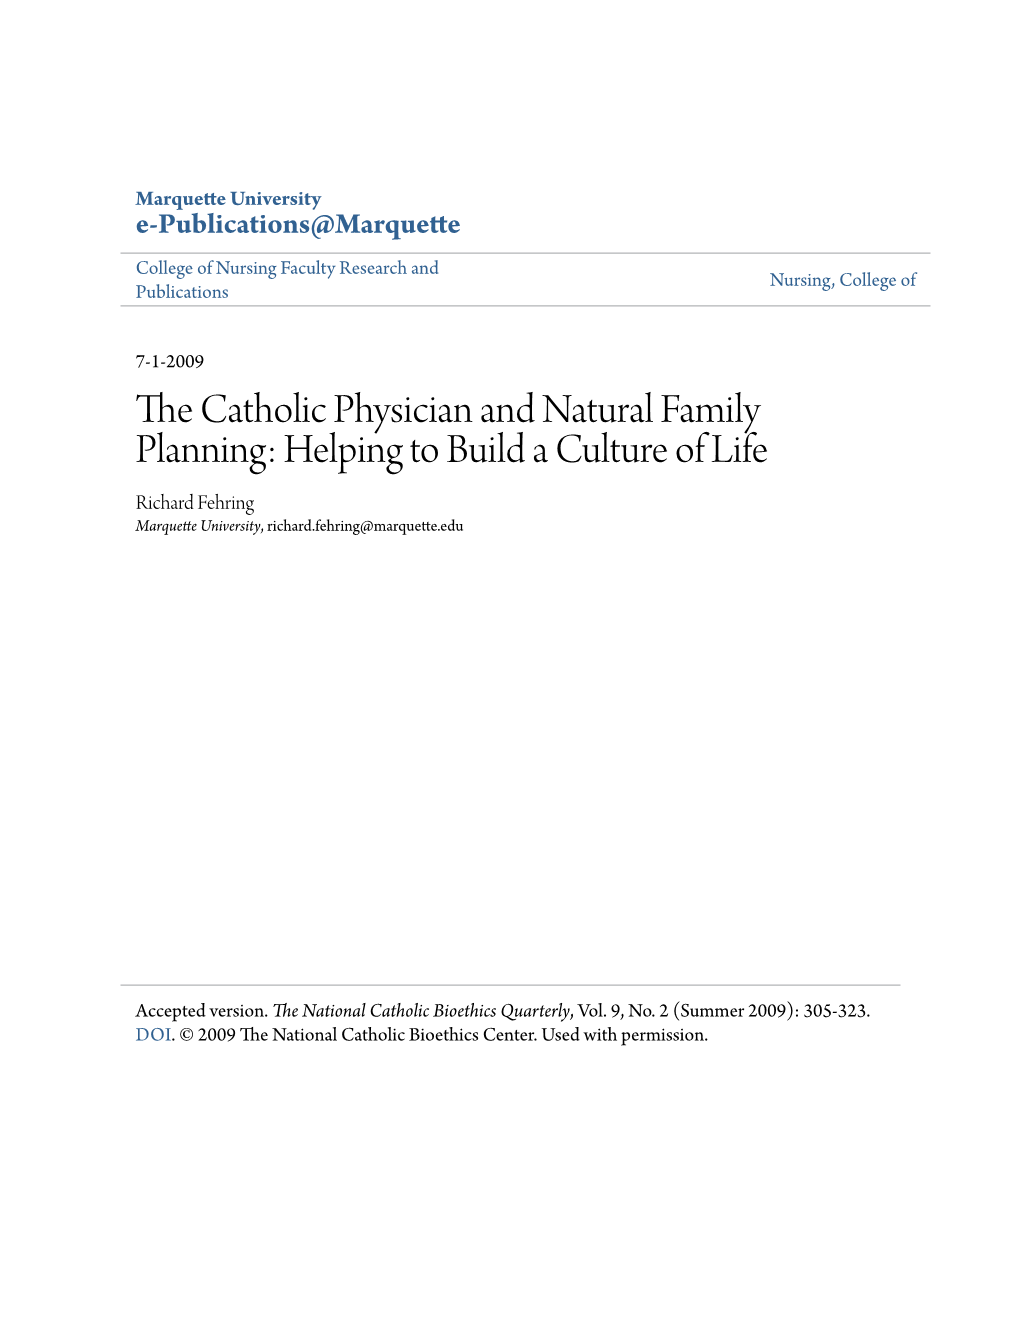 The Catholic Physician and Natural Family Planning